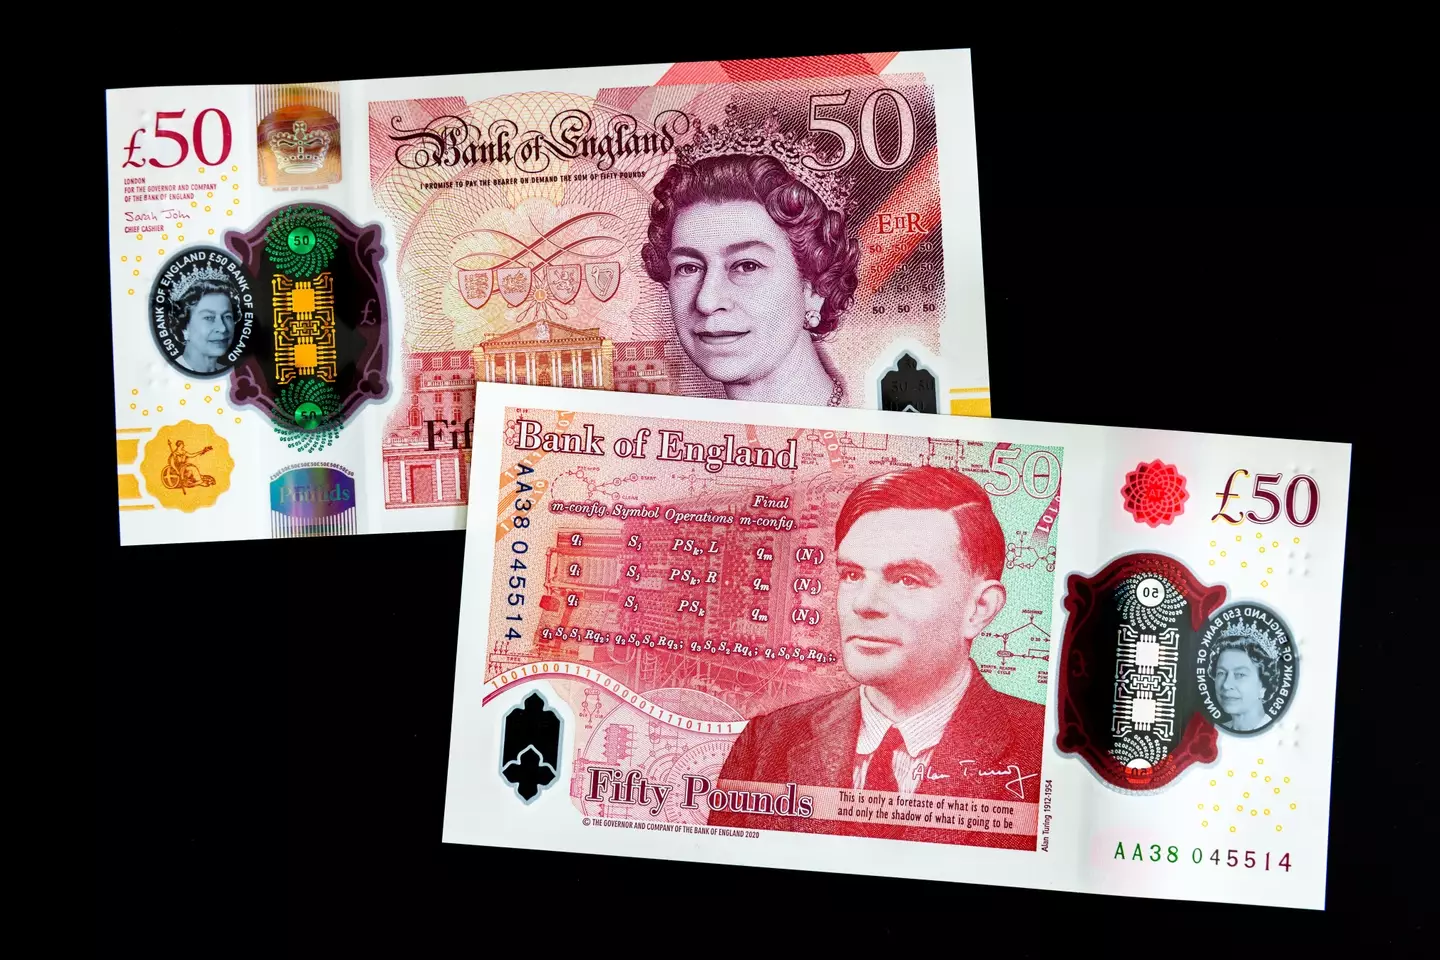 If you ever actually see a £50 make sure it's got Alan Turing's face on it.